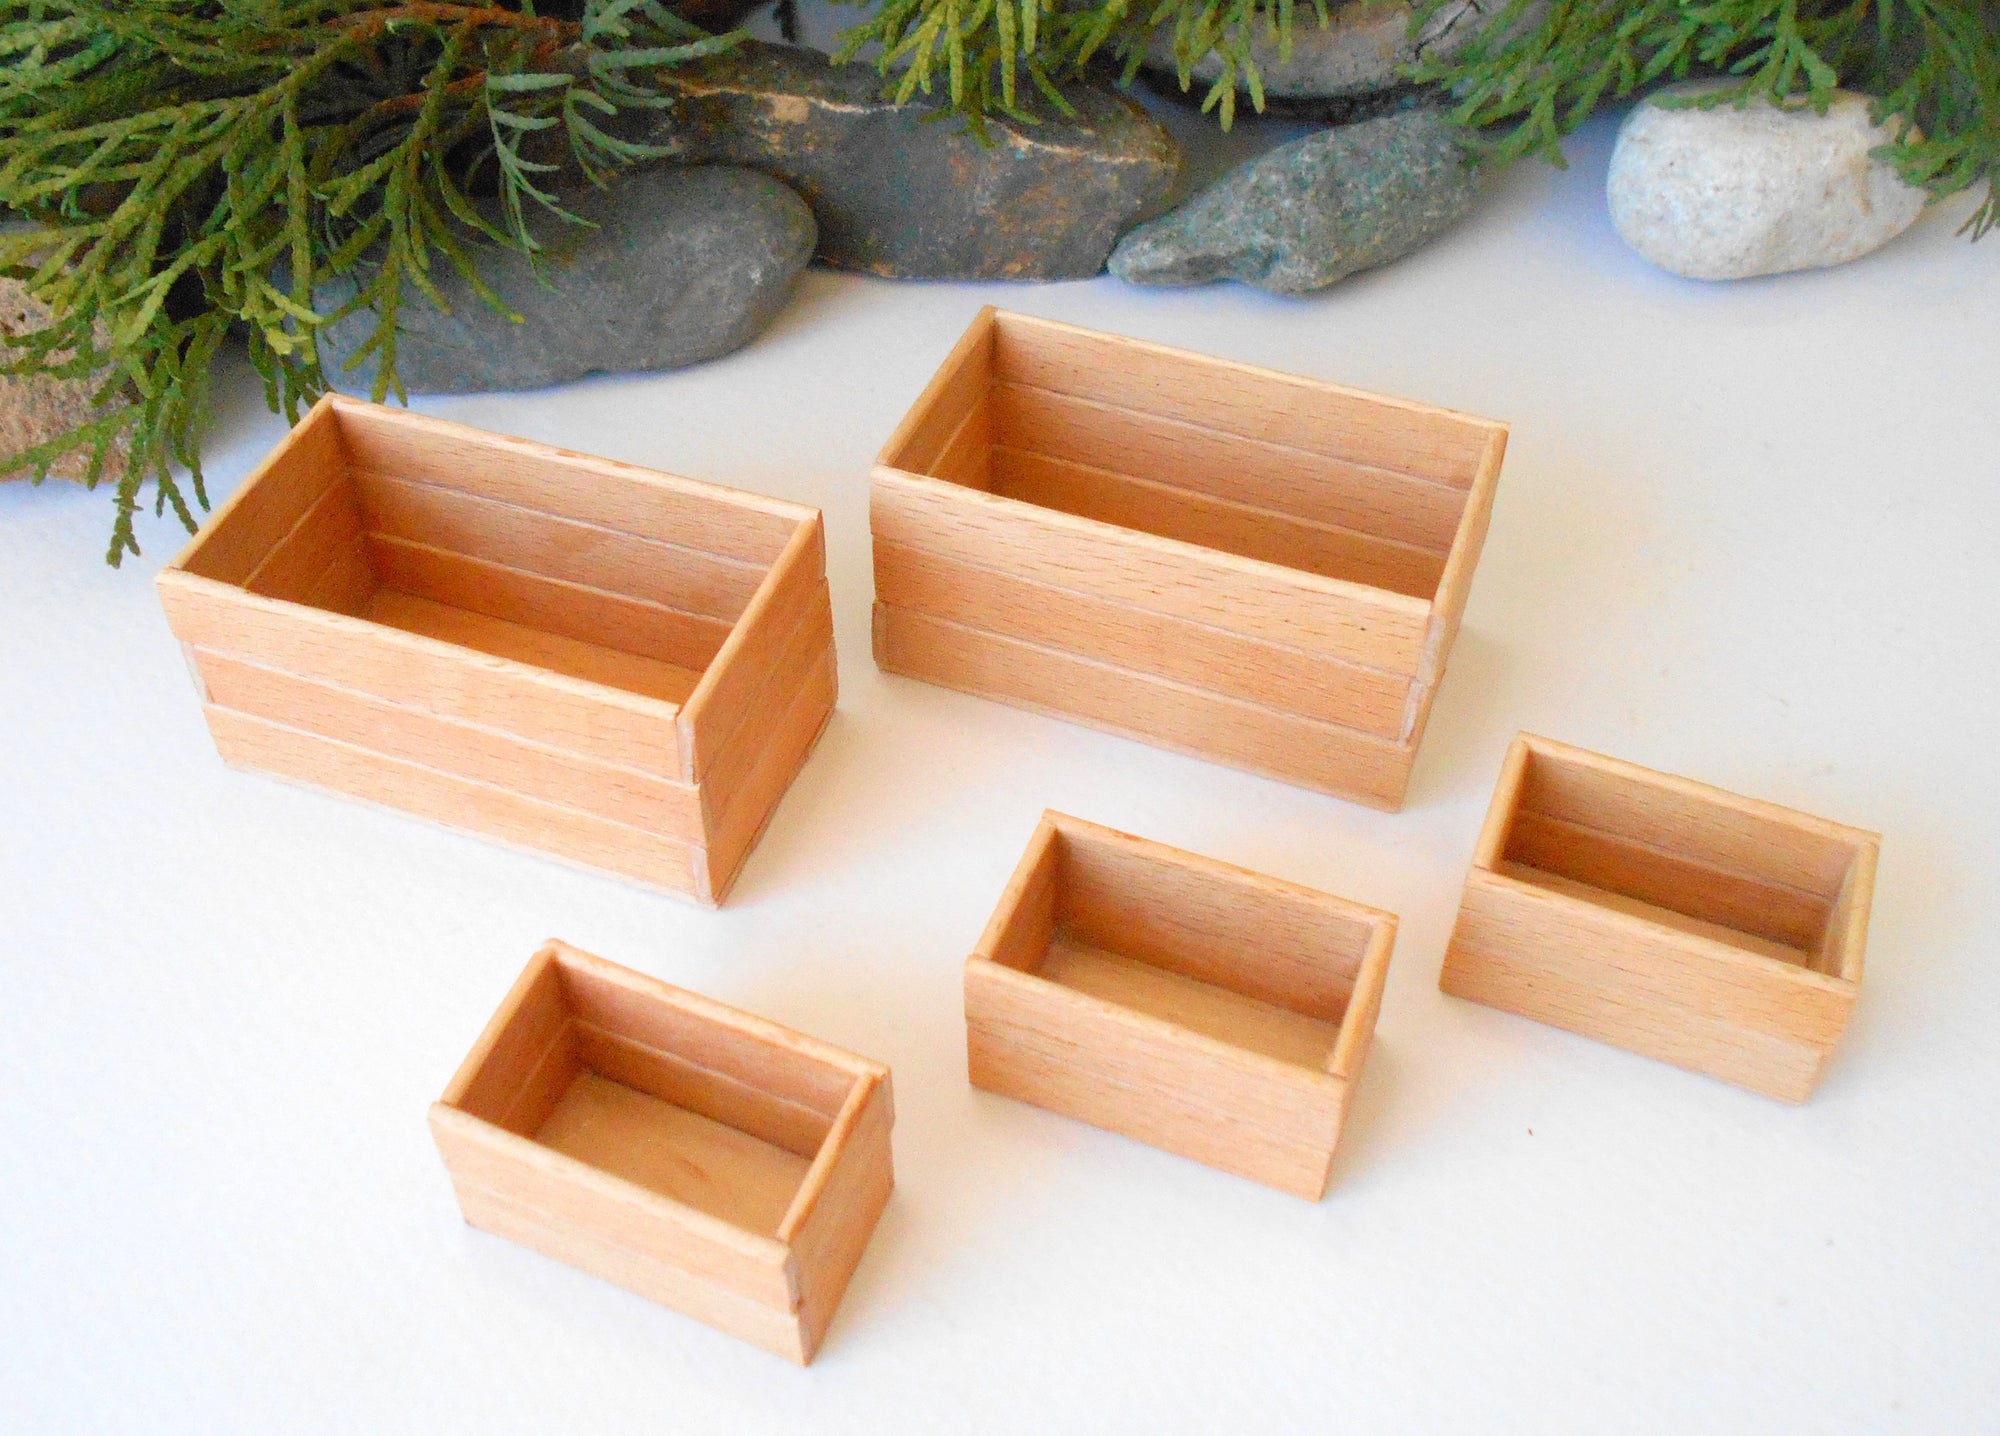 This is a set of 5 miniature boxes that are in 1/12 in scale. I craft them on order from beech popsicle sticks that I saved from being thrown away when I worked in an Ice cream factory in the Netherlands in 2023. The set consists of 2 big rectangular boxes and 3 smaller rectangular boxes.